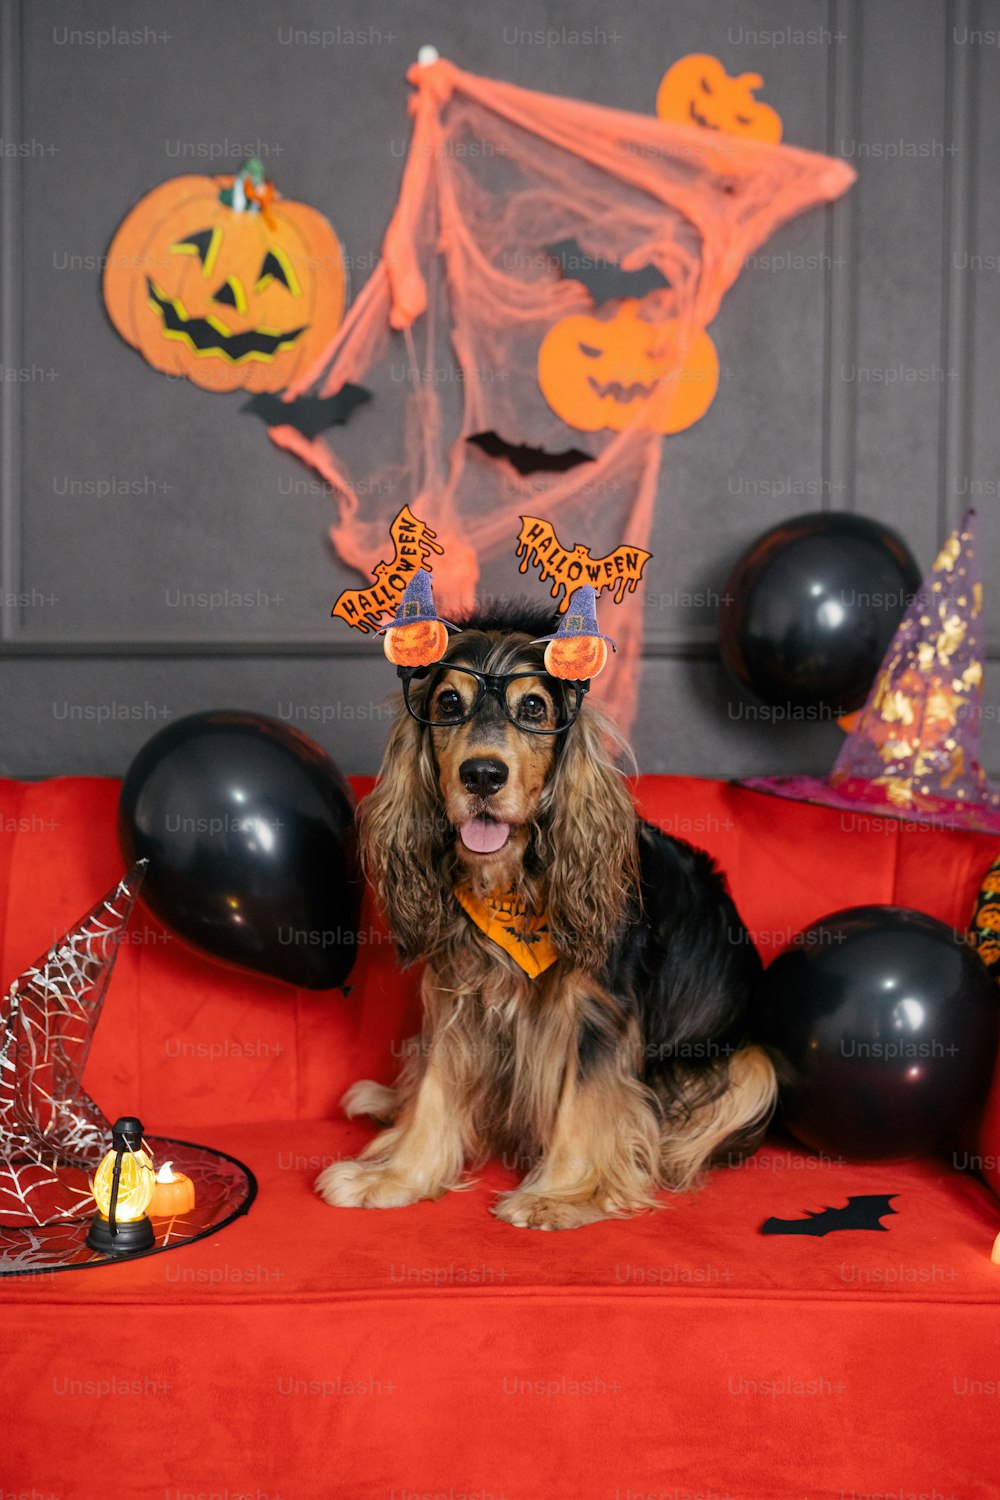 a dog sitting on a red couch with halloween decorations